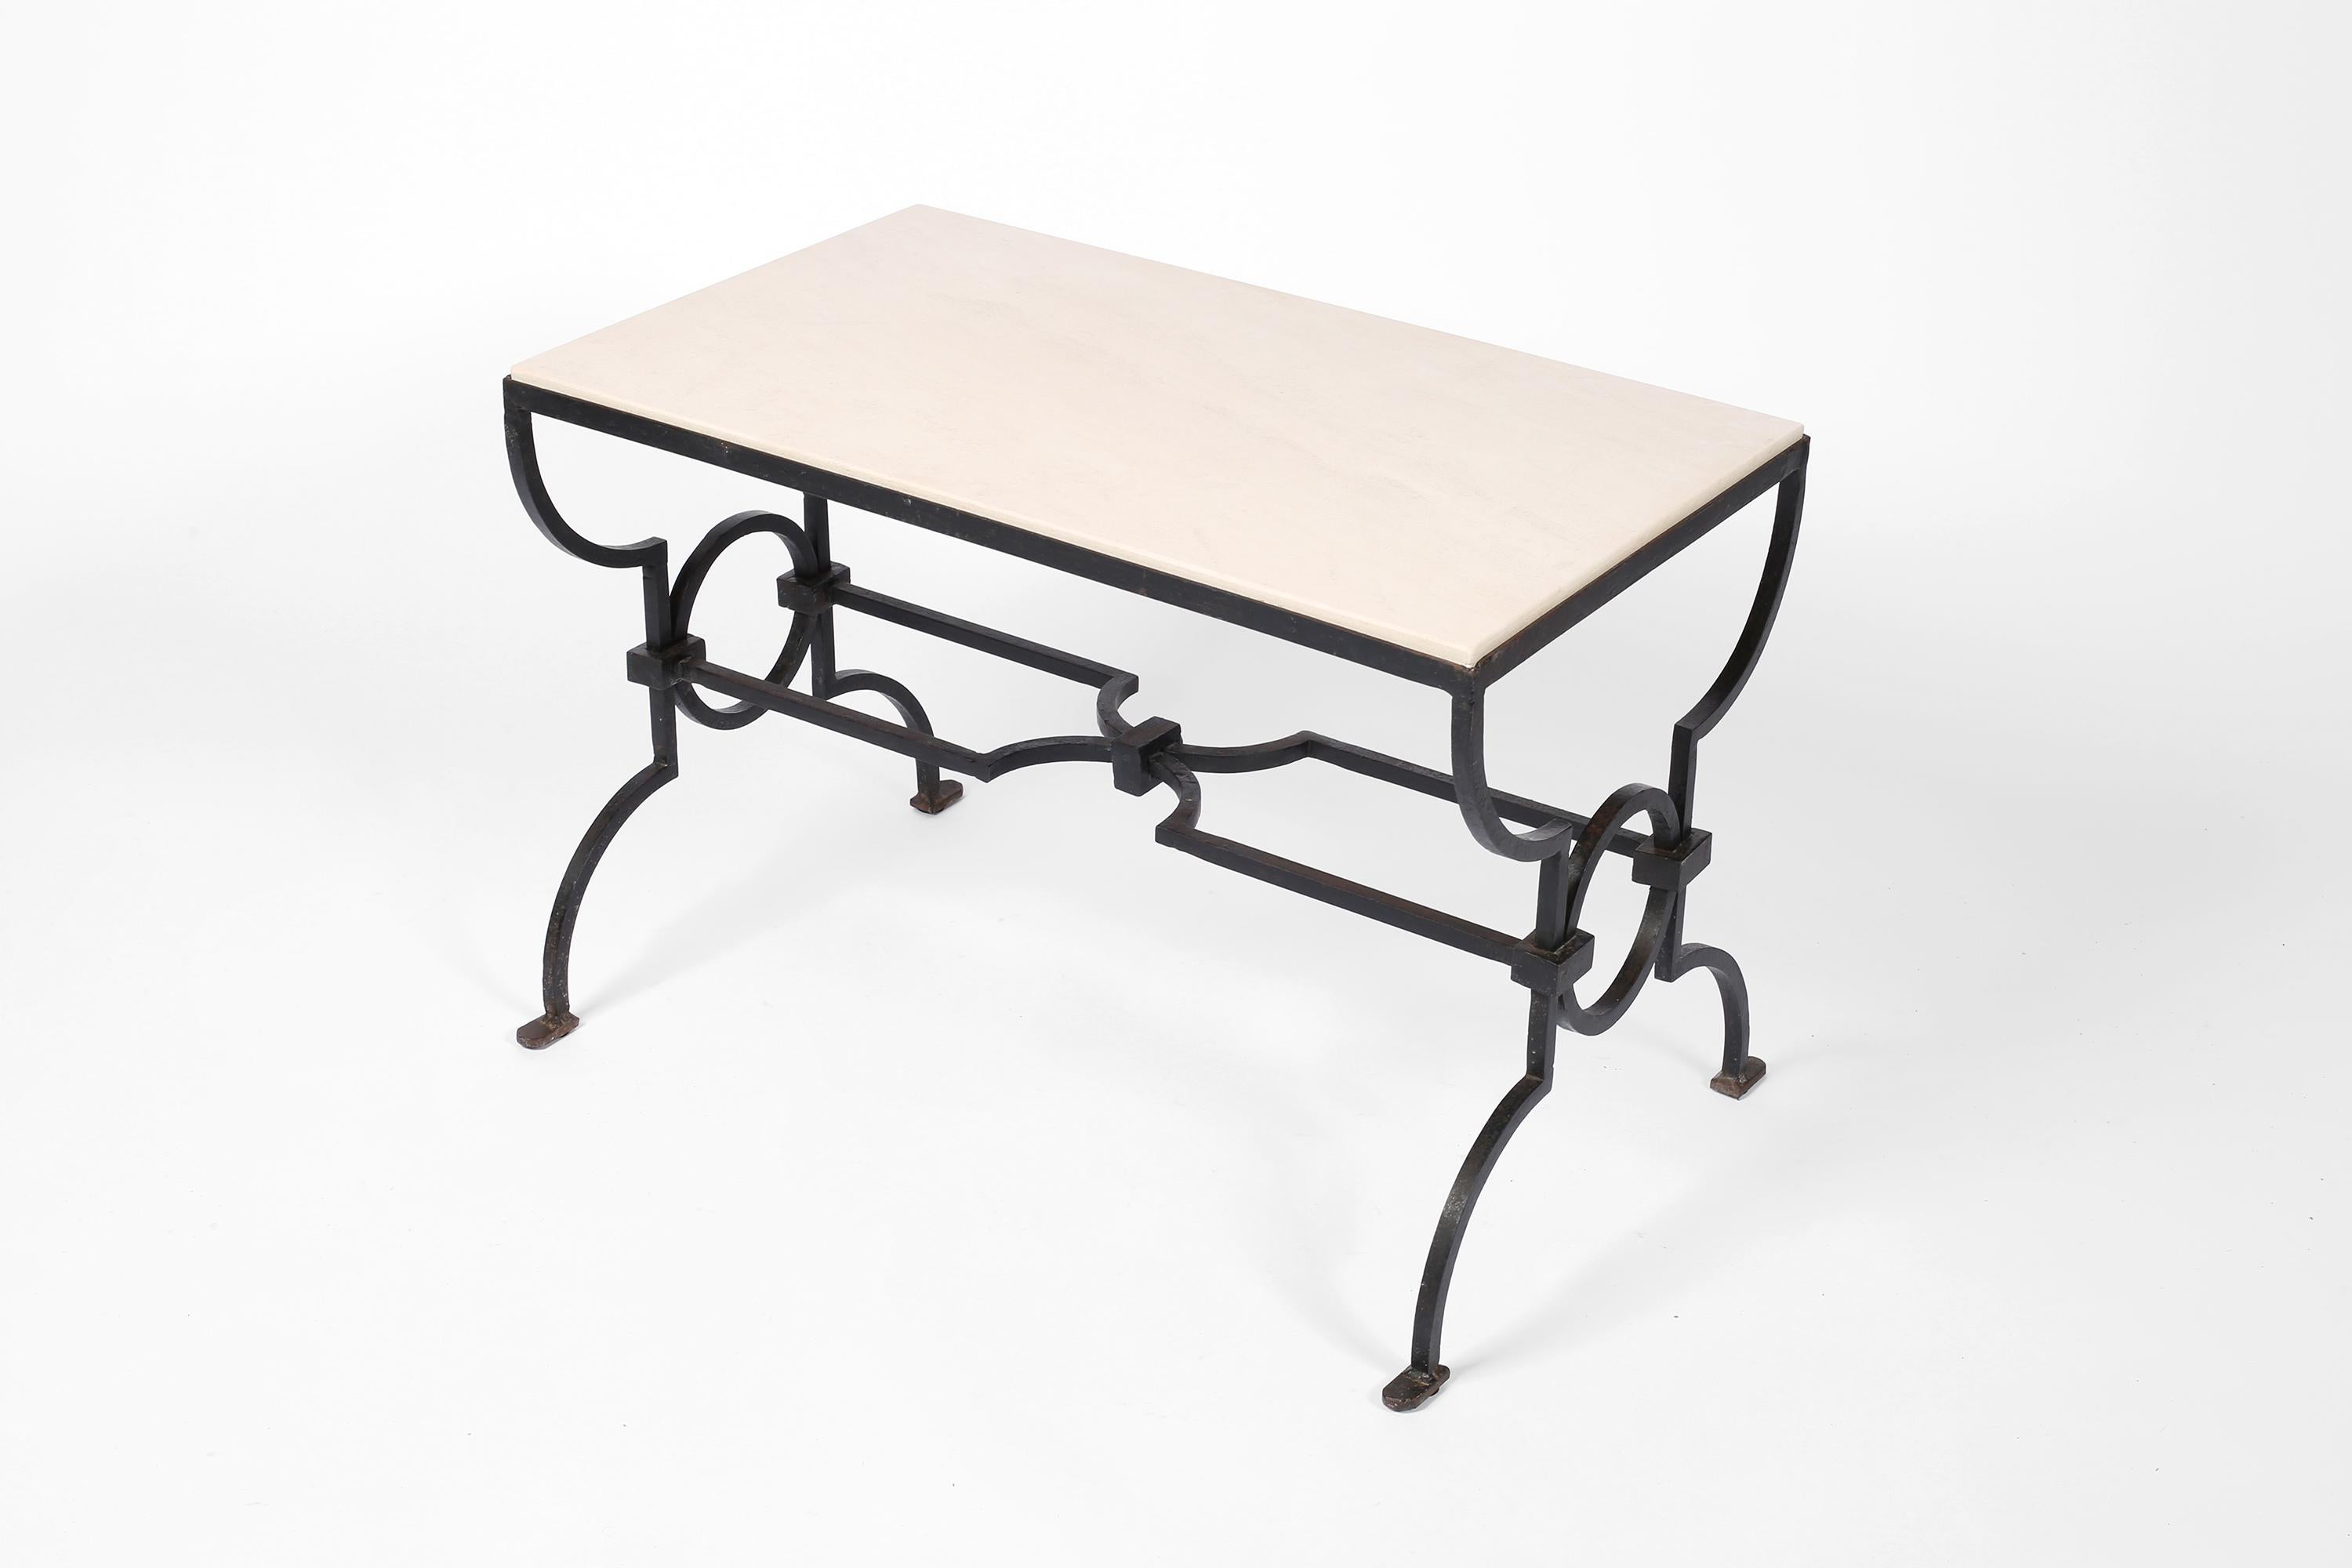 A forged iron and limestone coffee table by Gilbert Poillerat (1902-1988), from a drawing by Jacques Adnet (1900-1984). French, c. 1940.